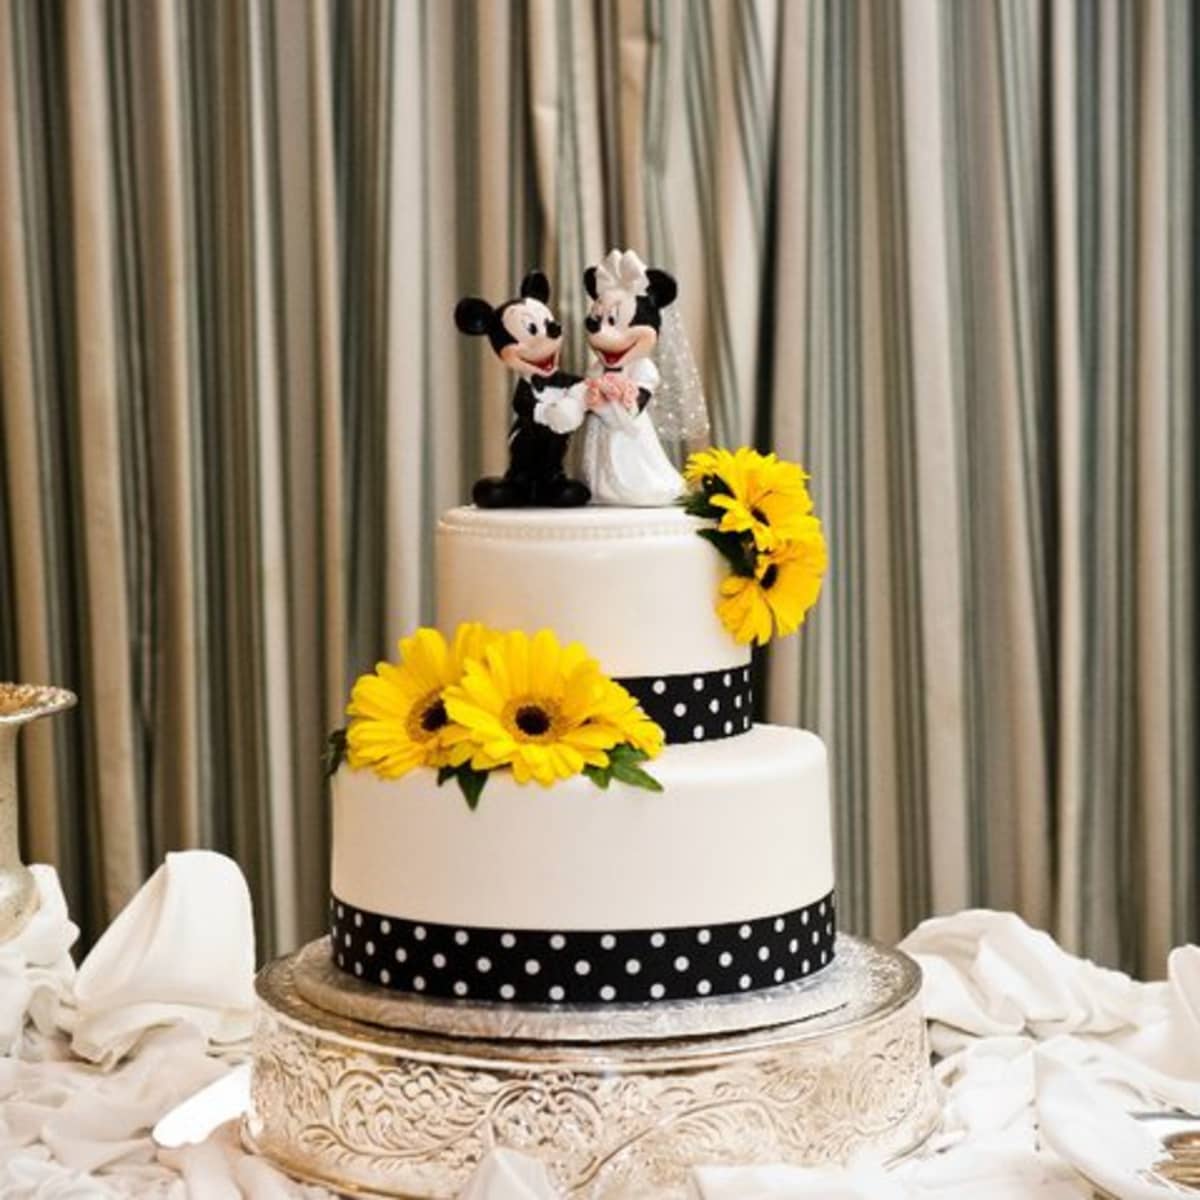 Top 10 Disney Fairy Tale Wedding Cakes - HubPages